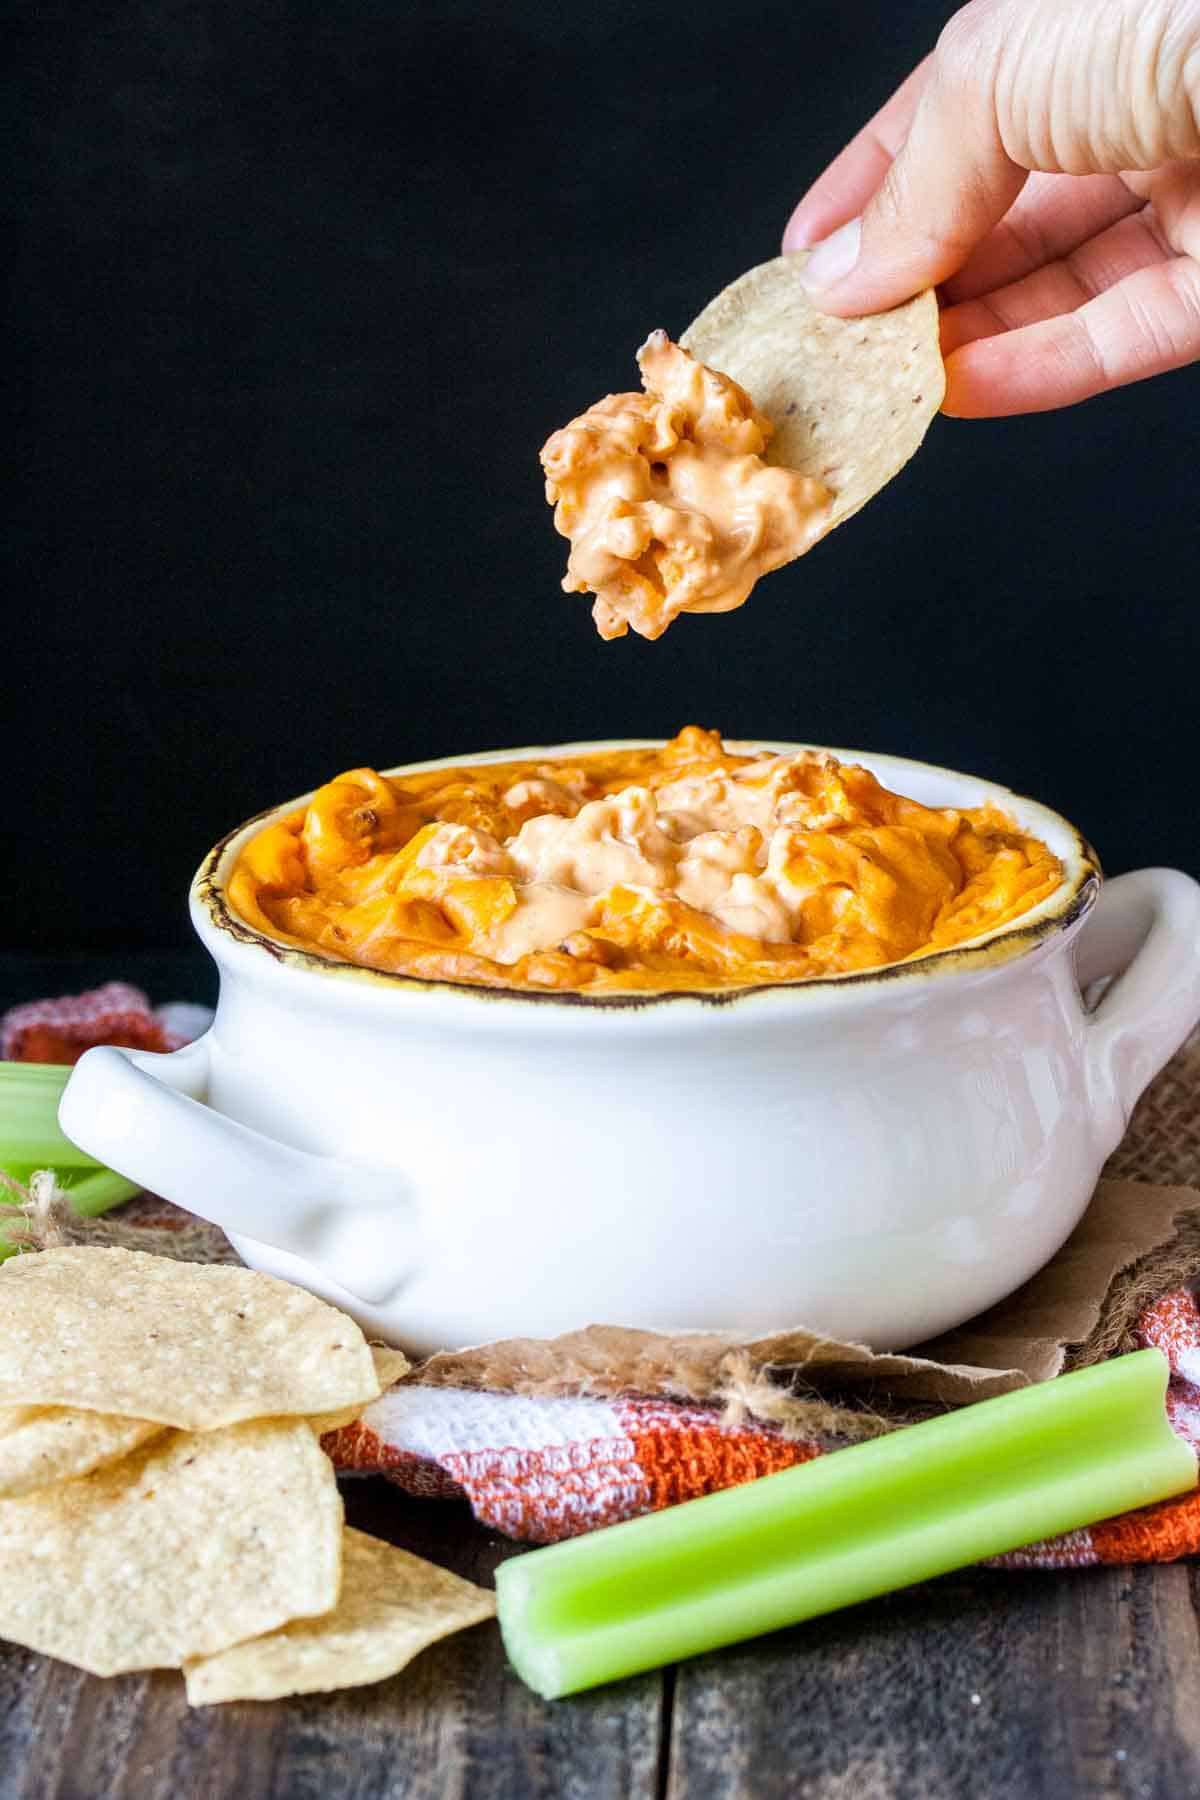 Hand using chip to take a bite from a bowl of baked buffalo dip